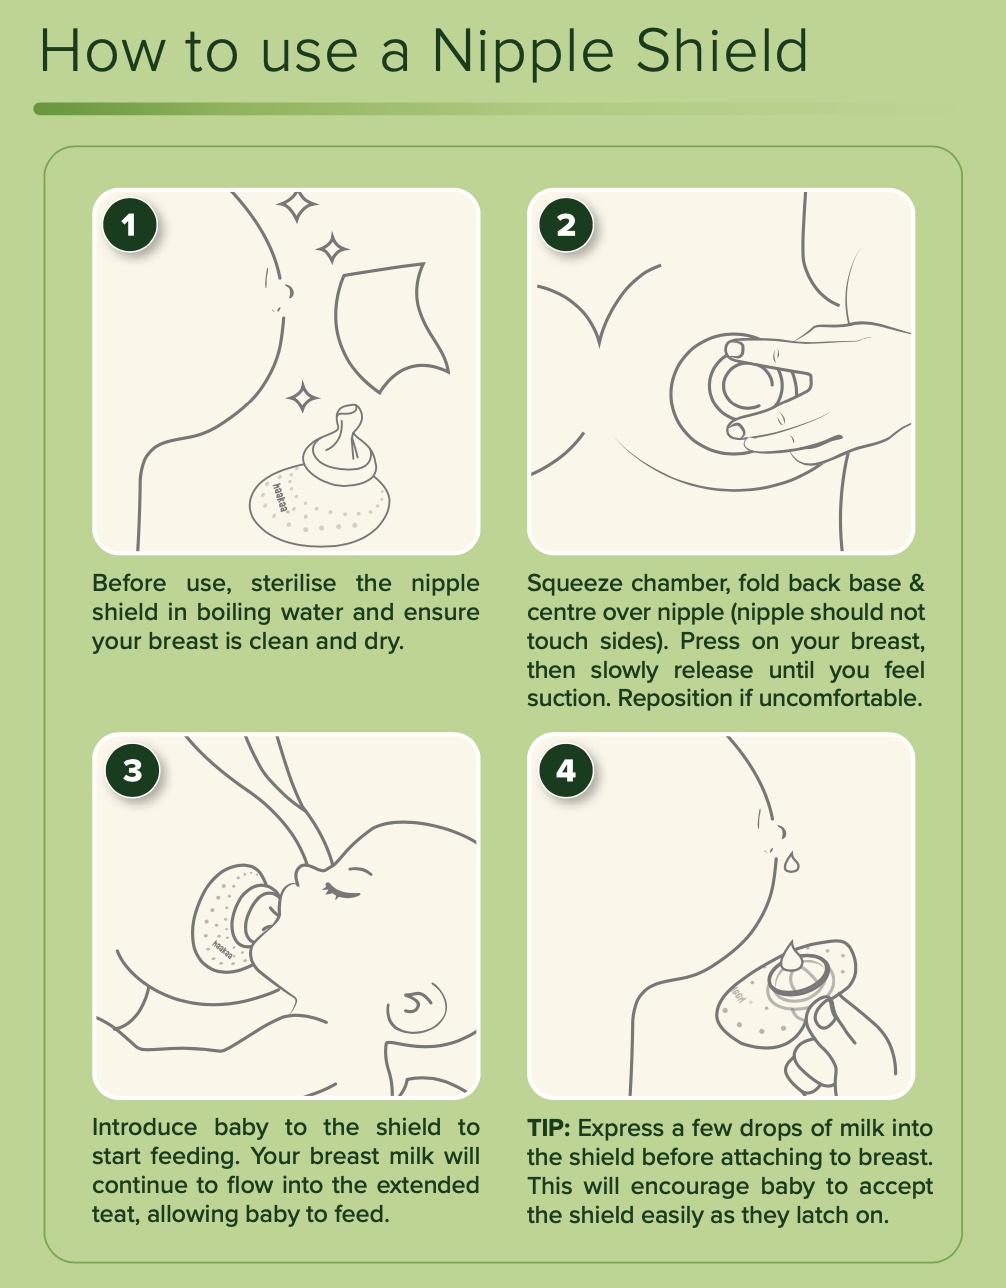 How to Breastfeed With a Nipple Shield